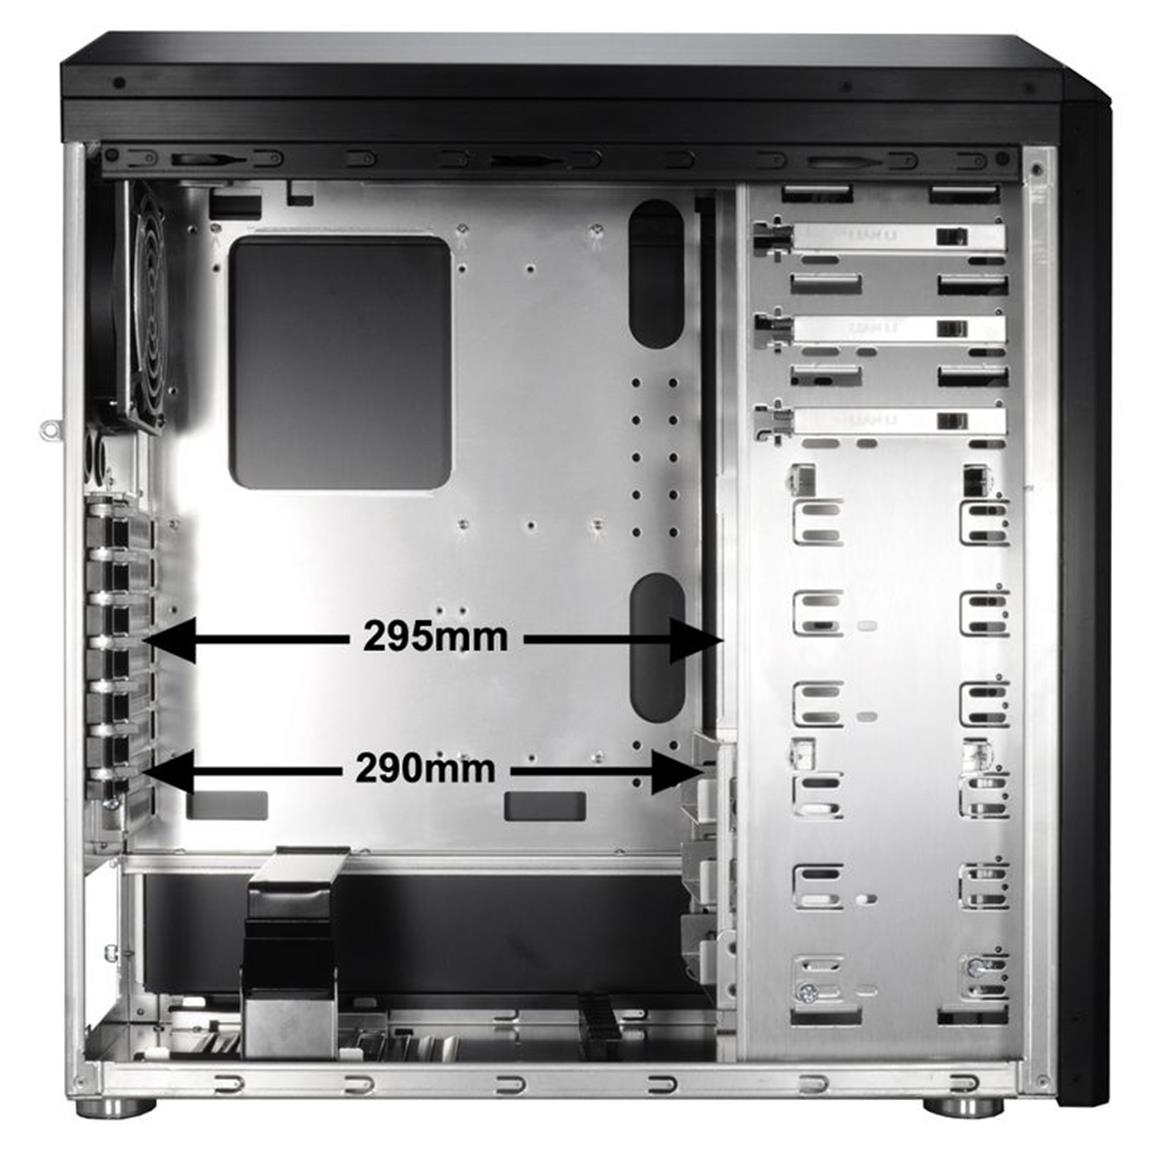 Lian Li Launches ARMORSUIT PC-P50 Gaming Chassis